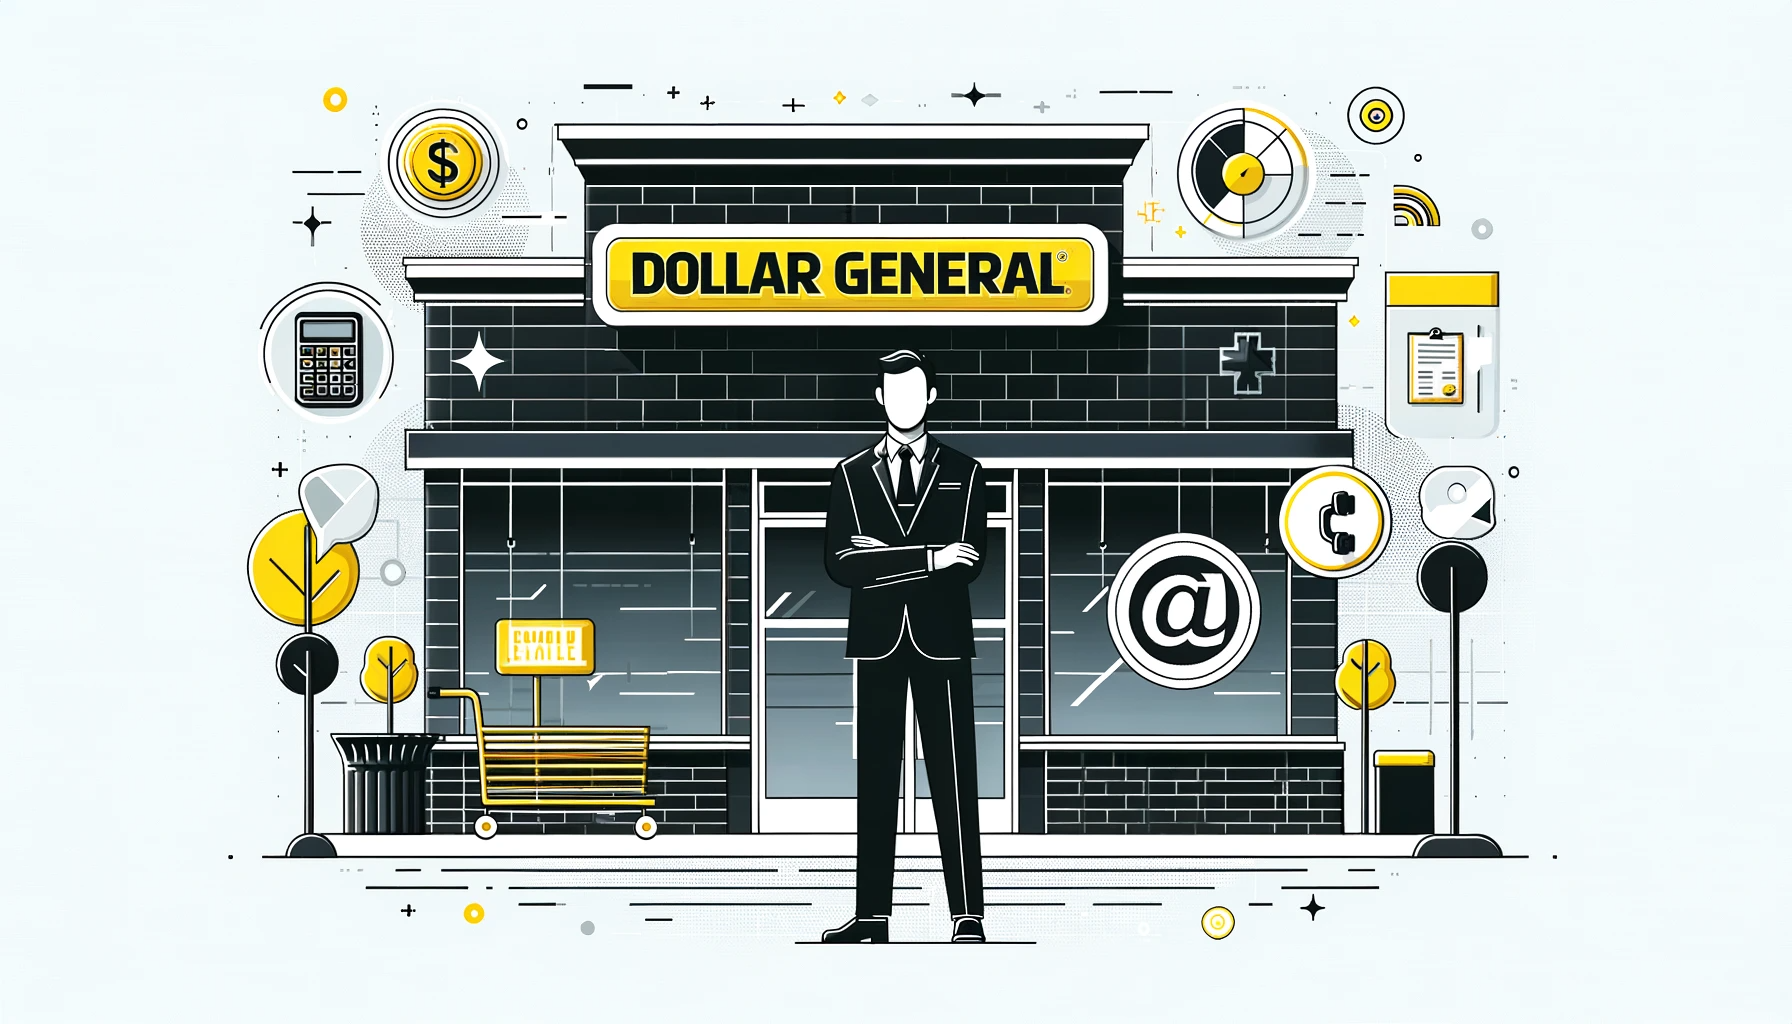 Dollar General store and district manager communication concept